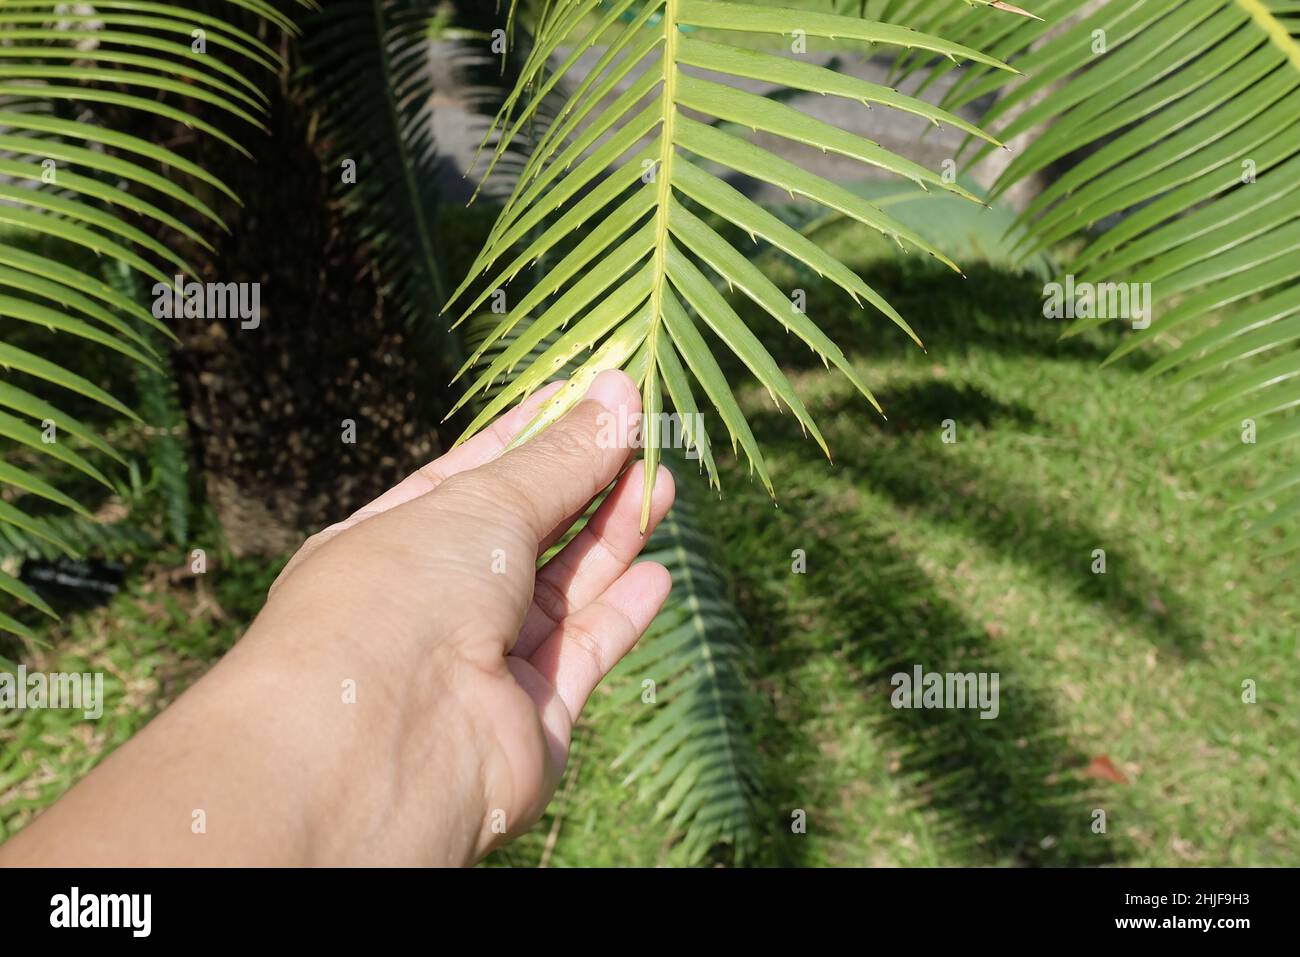 Gardener Holding Carefully Dioon Edule Plants or Chestnut Dioon Palm. A Succulent Plants with Thick and Fleshy Leaves with Sharp Thorns. Stock Photo